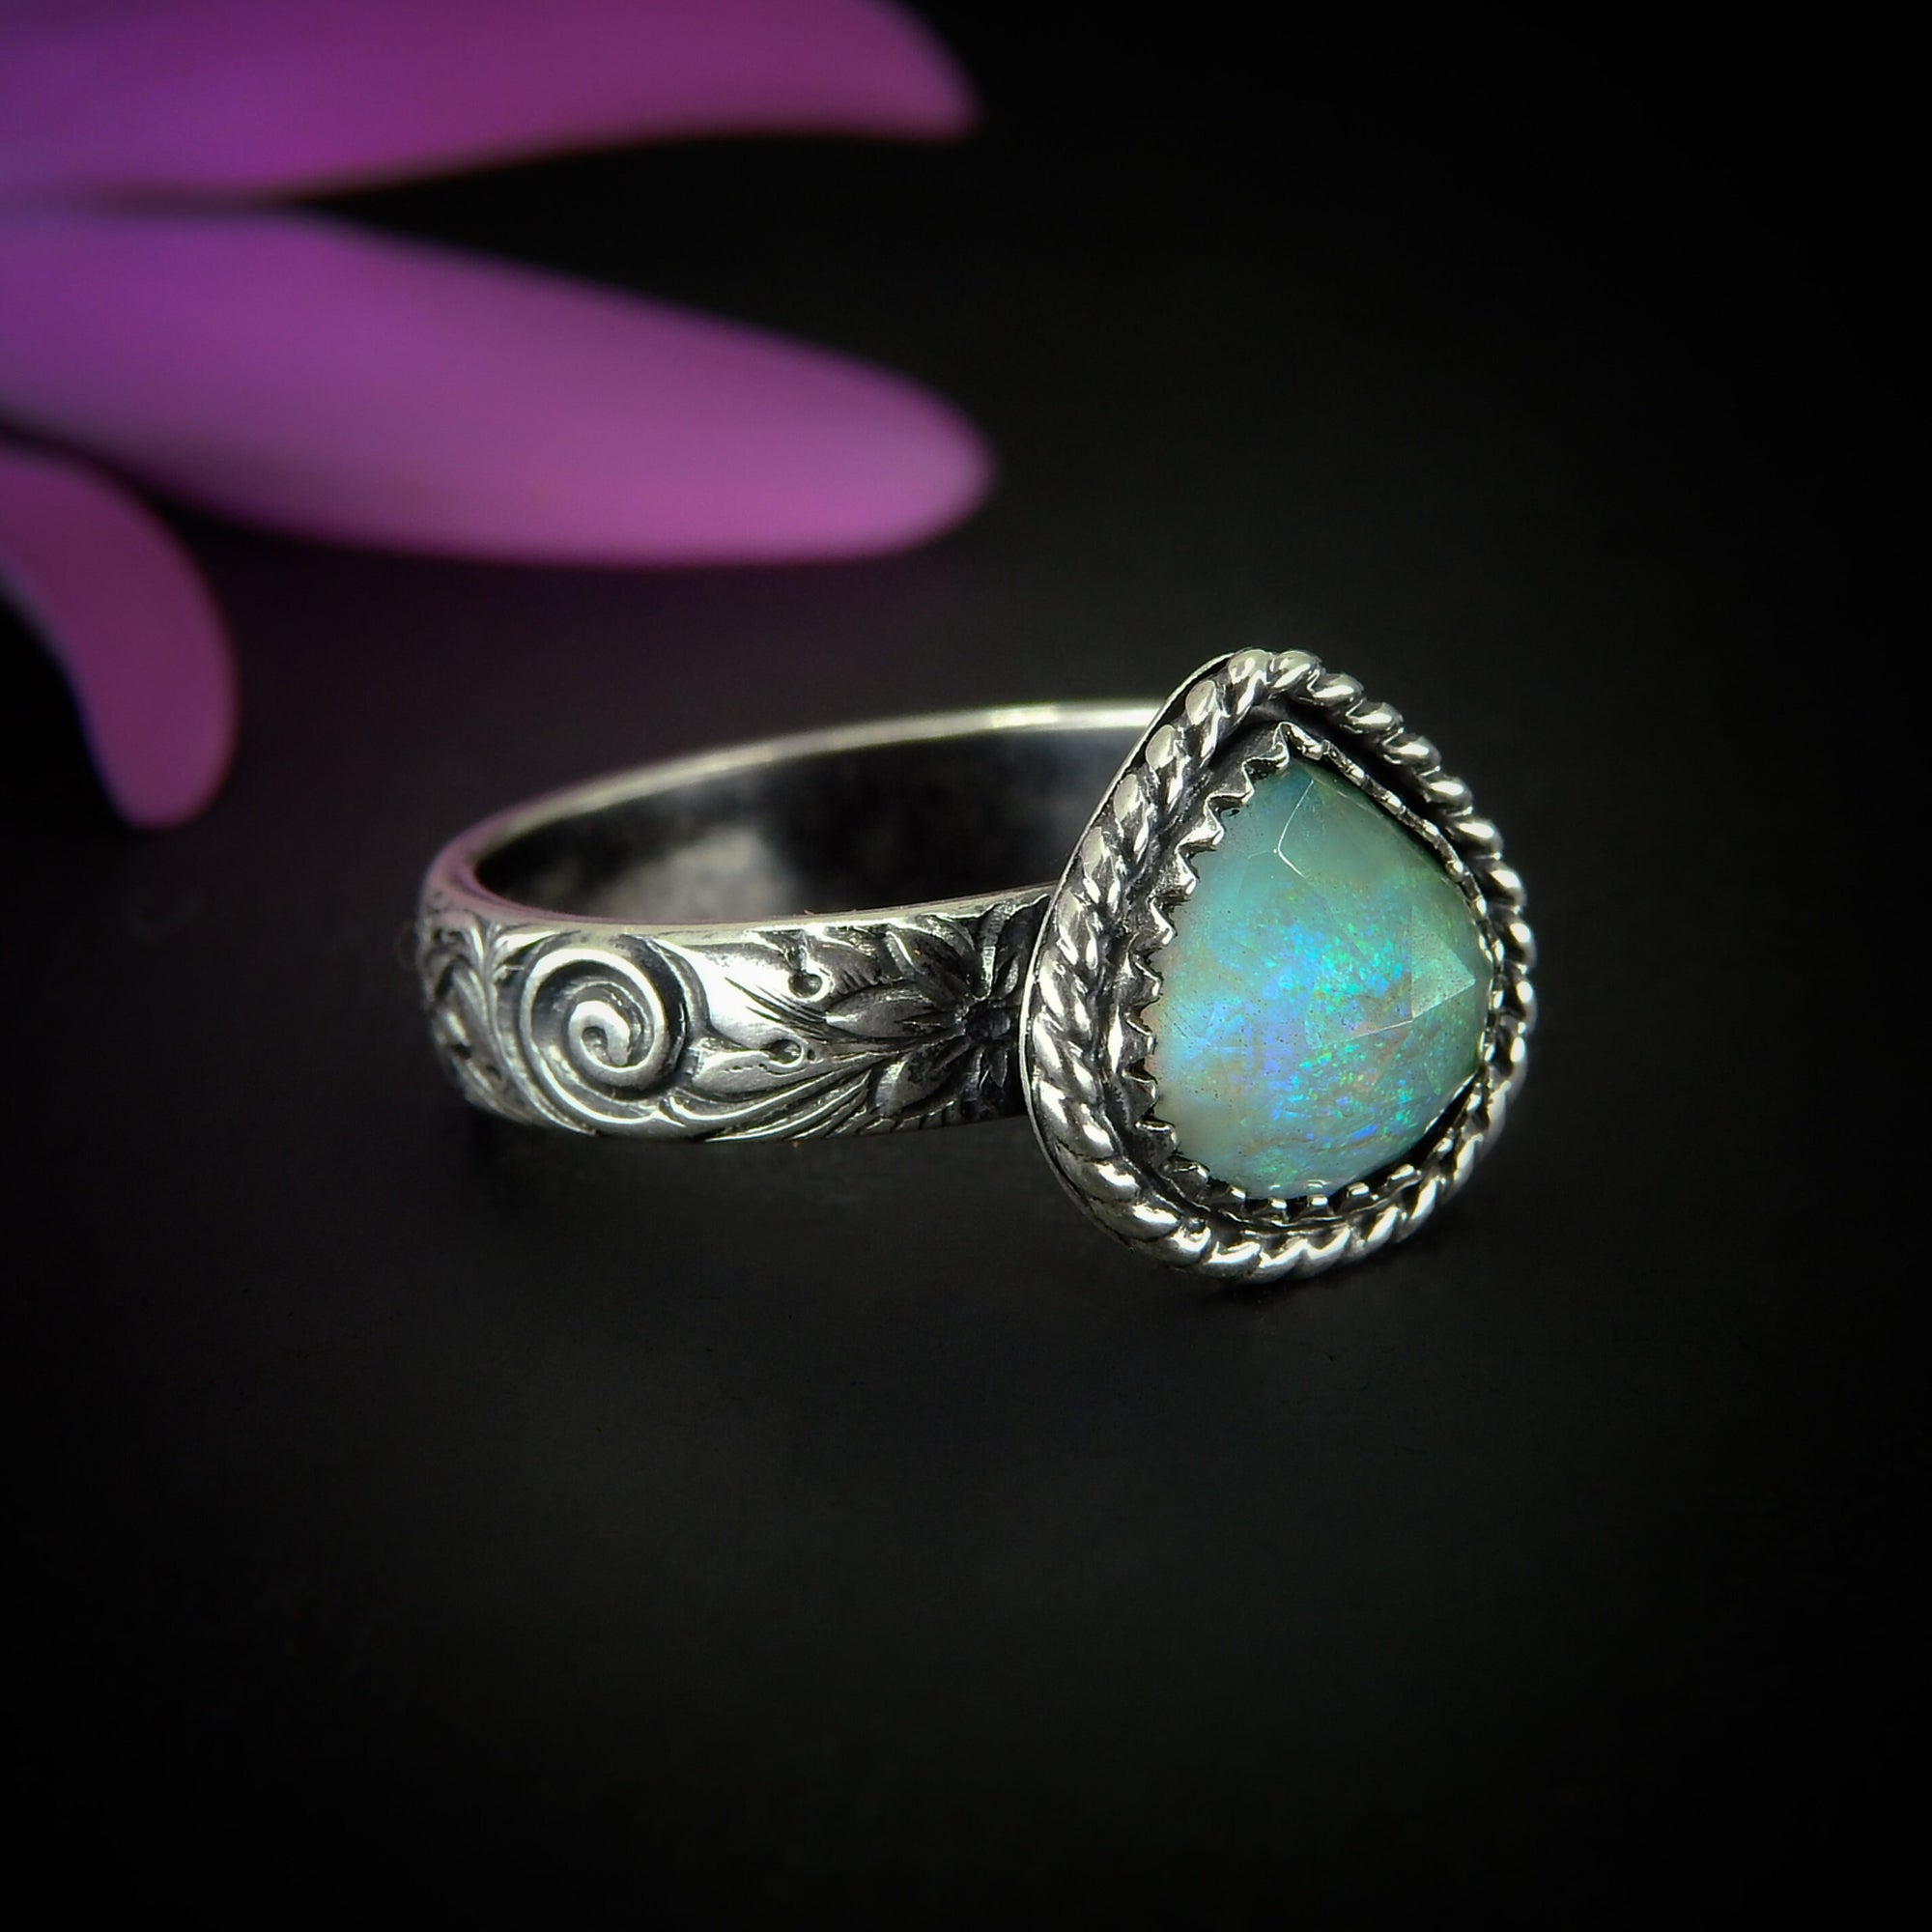 Rose Cut Clear Quartz & Monarch Opal Ring - Size 11 1/4 - Sterling Silver - Rainbow Opal Jewellery - Thick Floral Ring Band Rainbow Crystal